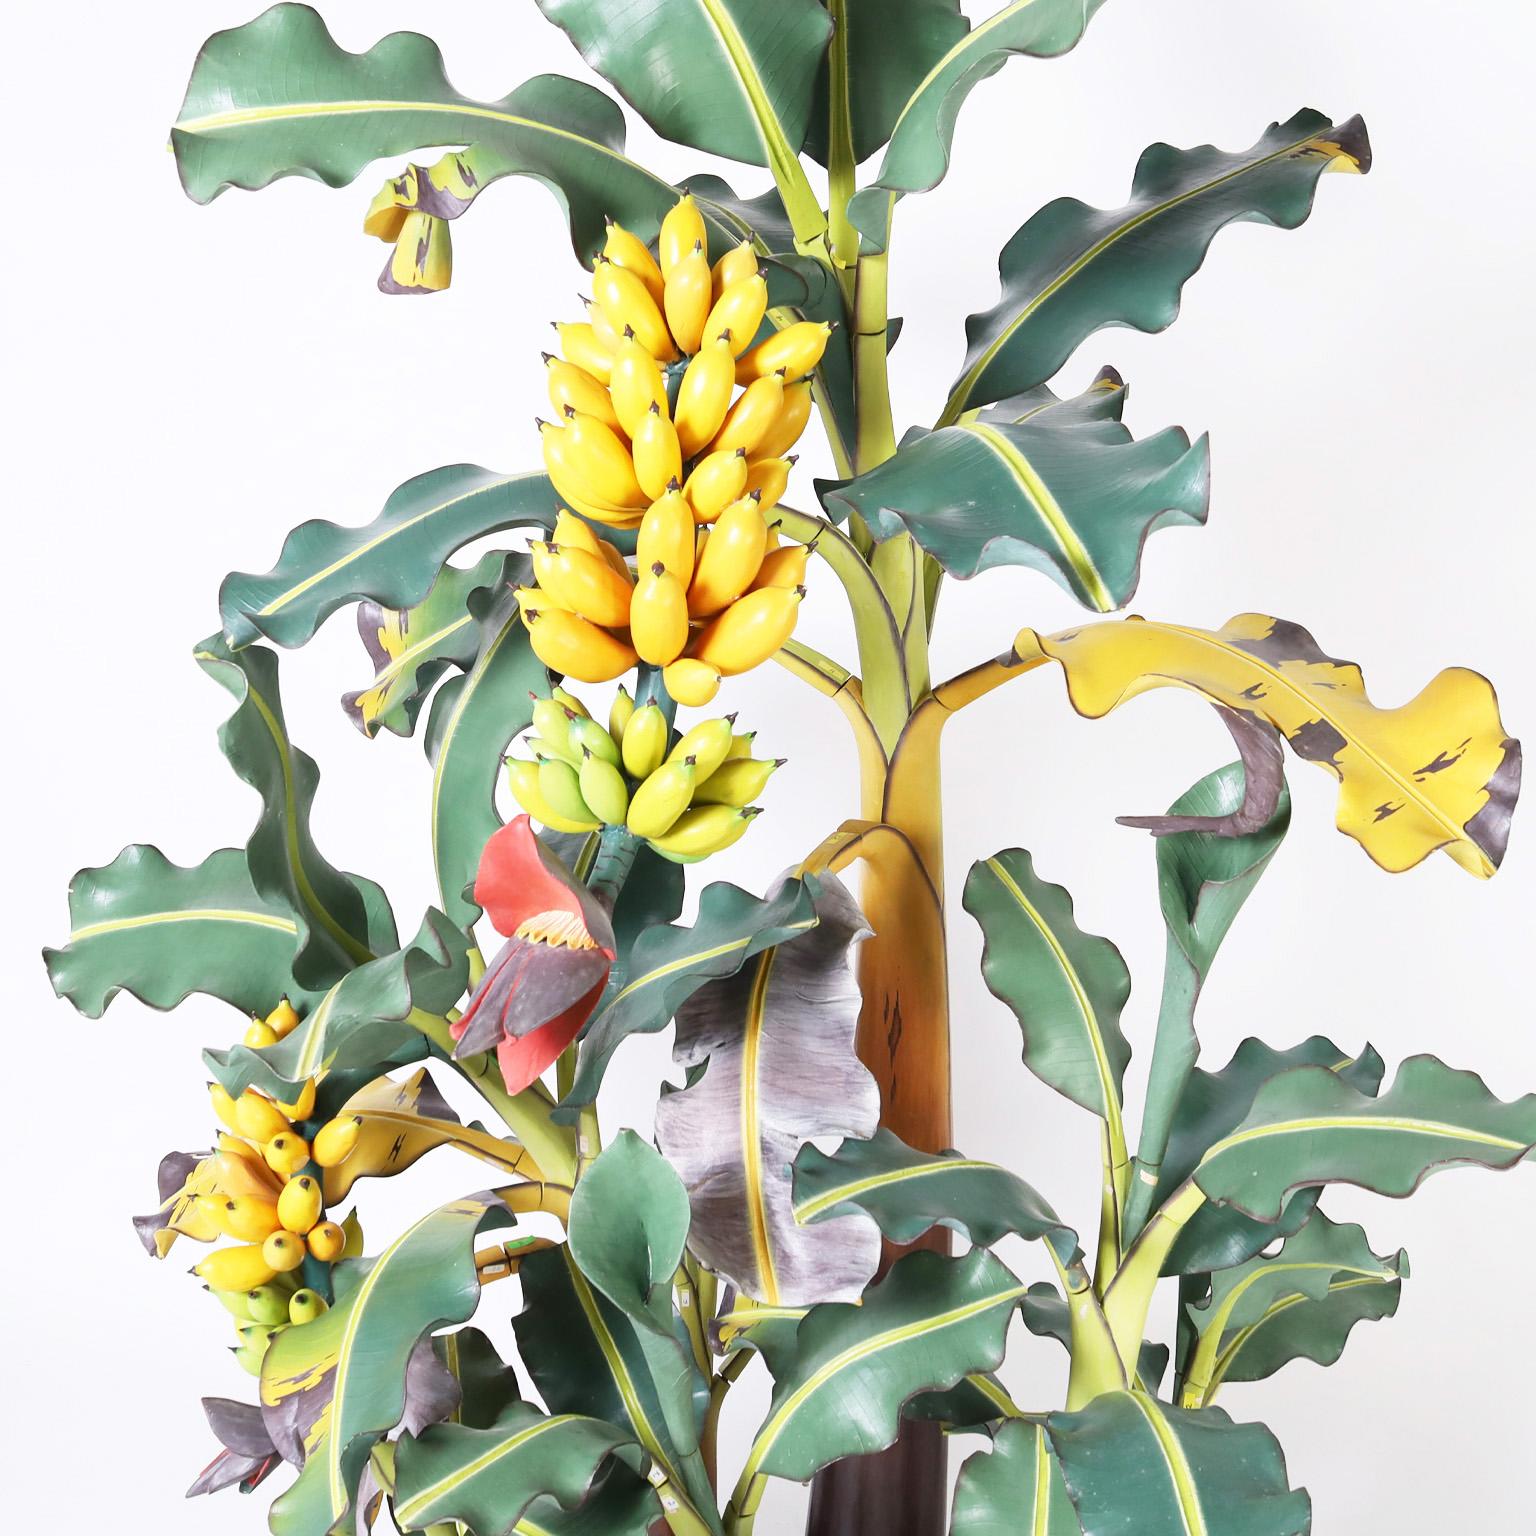 Hand-Crafted Life Size Carved Wood Banana Tree Sculpture